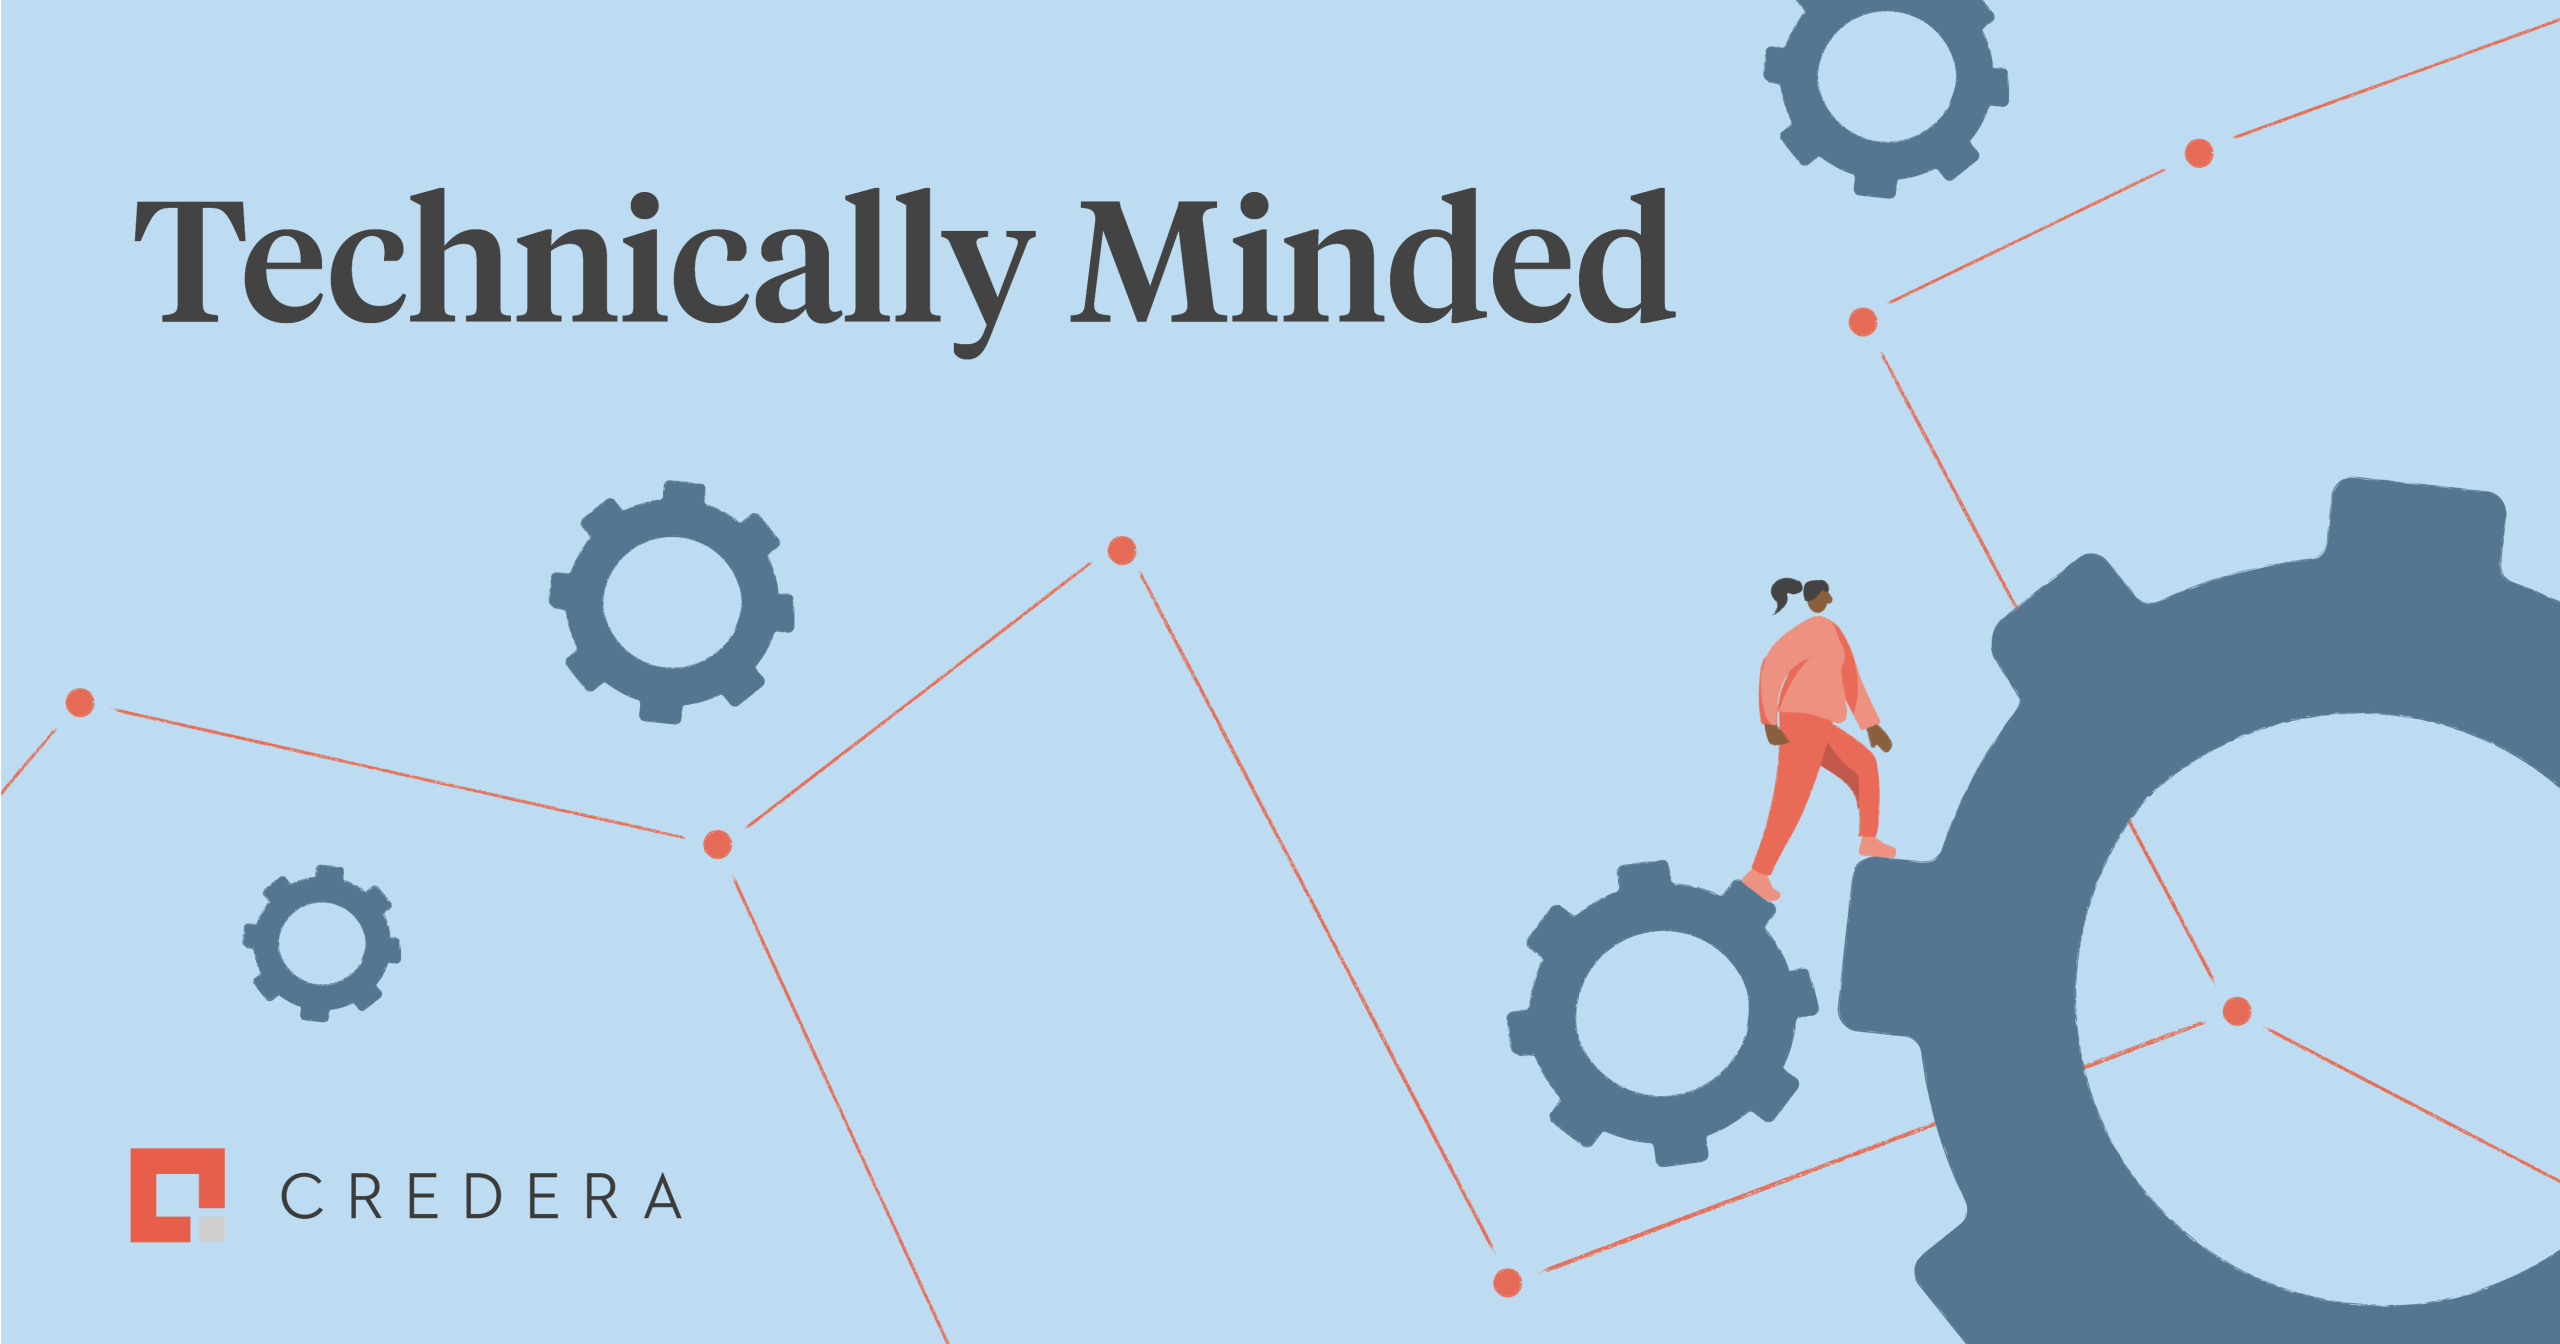 Technically Minded: How Does Shaping a Diverse Workplace Lead to Successful Business Outcomes?